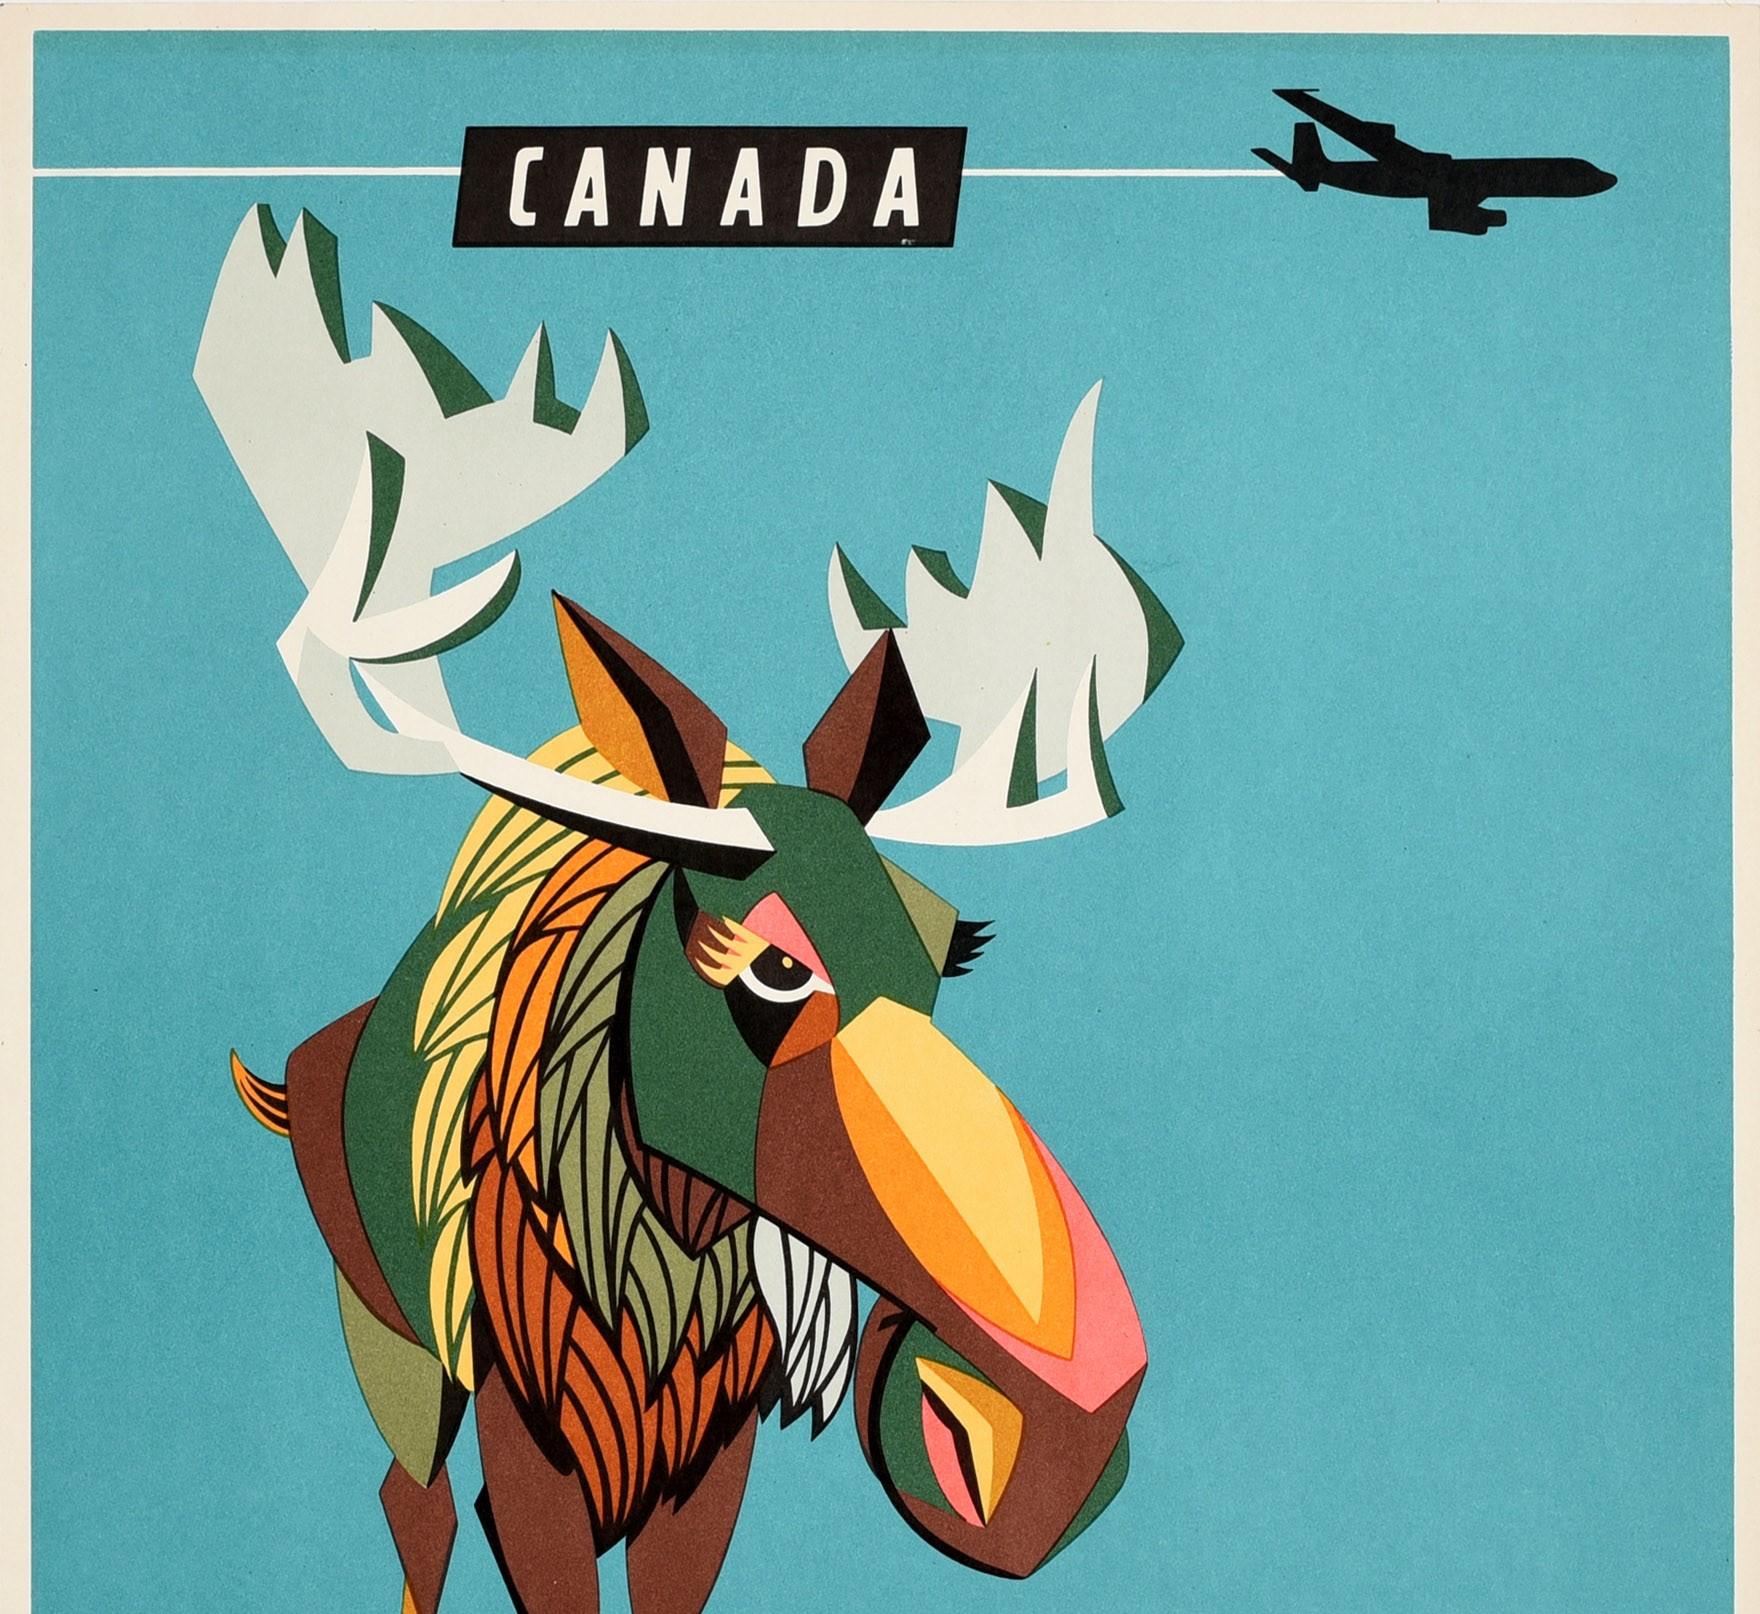 Original vintage travel poster for Canada issued by Qantas Australia's Overseas Airline in association with Air India, BOAC (British Overseas Airways Corporation), SAA (South African Airways) and TEAL (Tasman Empire Airways Limited) featuring a